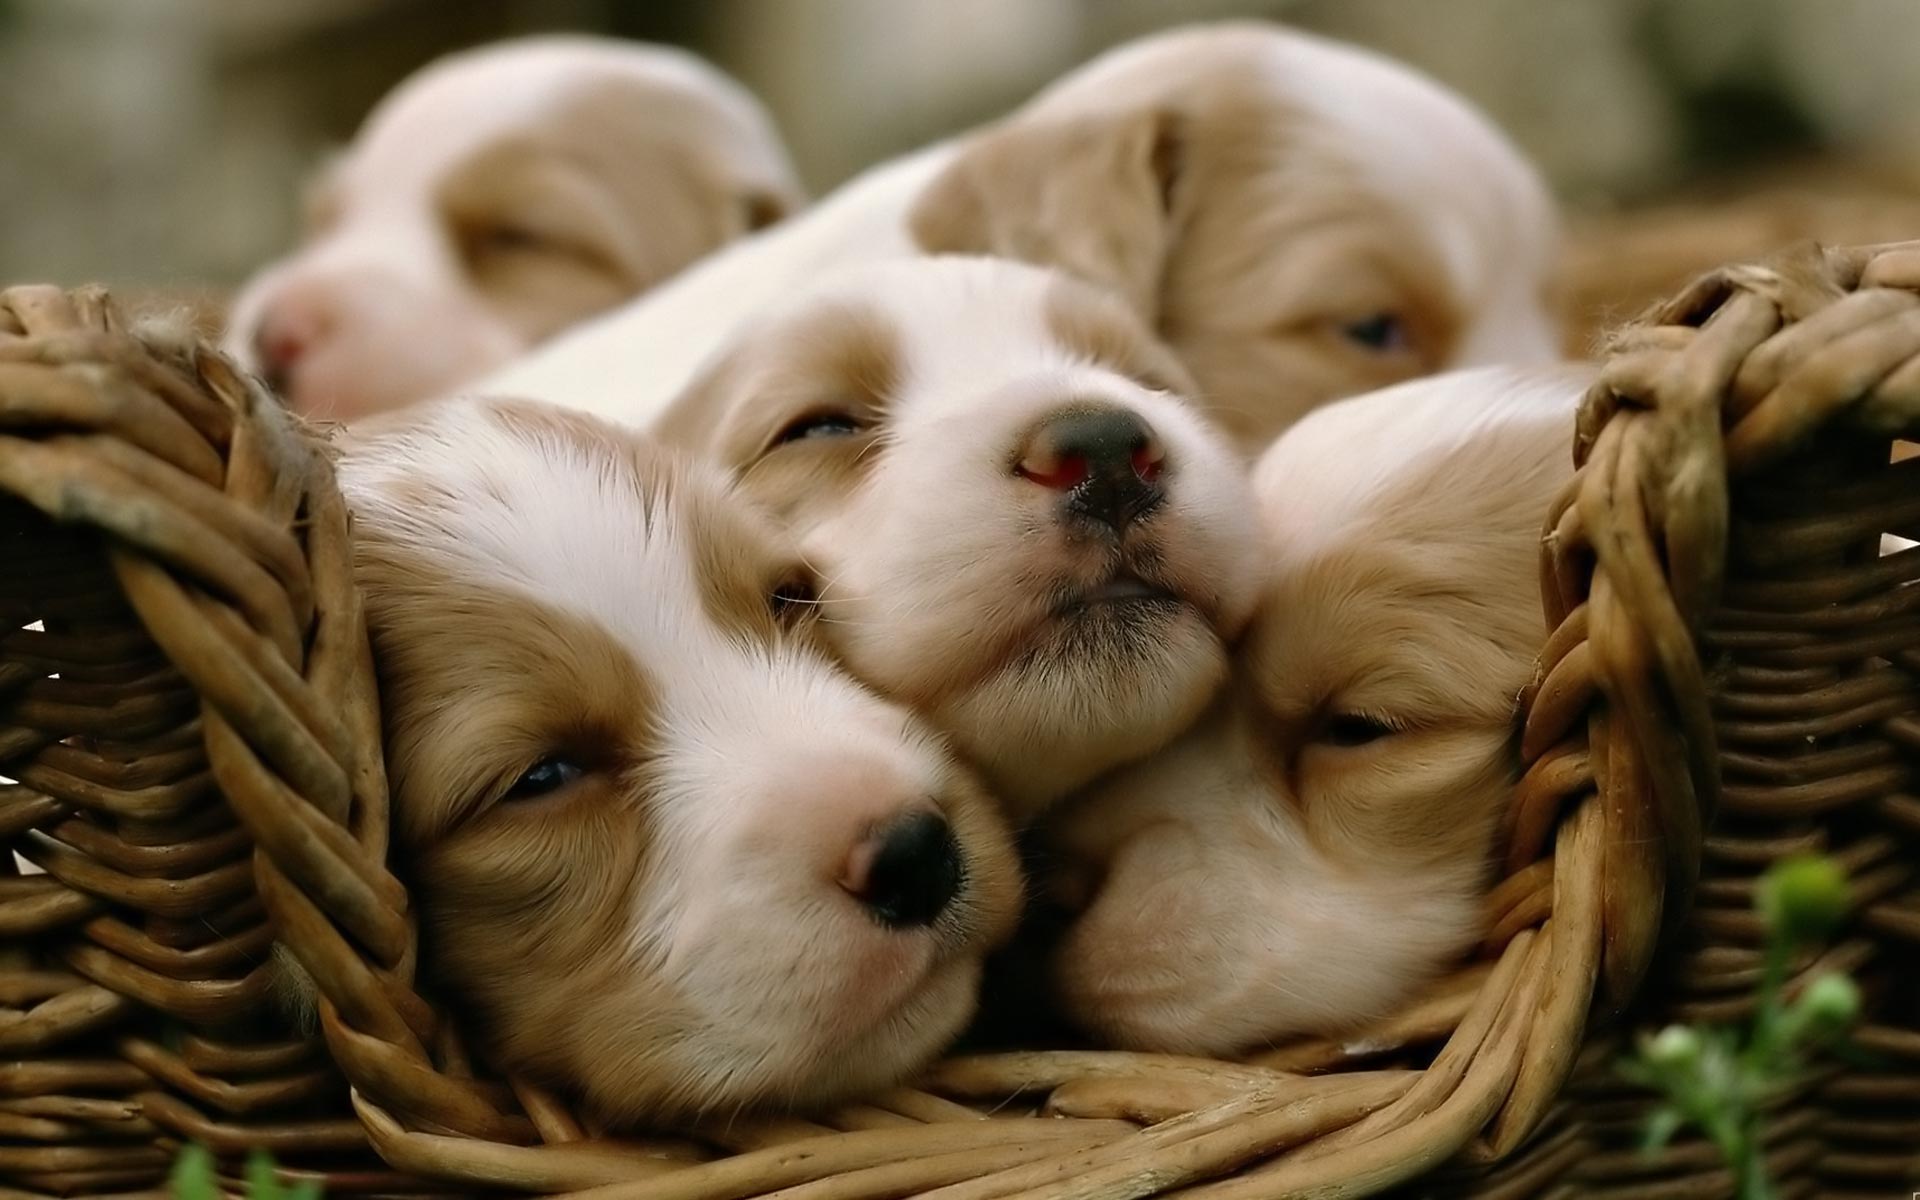 Cute Puppy Wallpapers Those Are Perfect To Make Your Mood Happy - Let